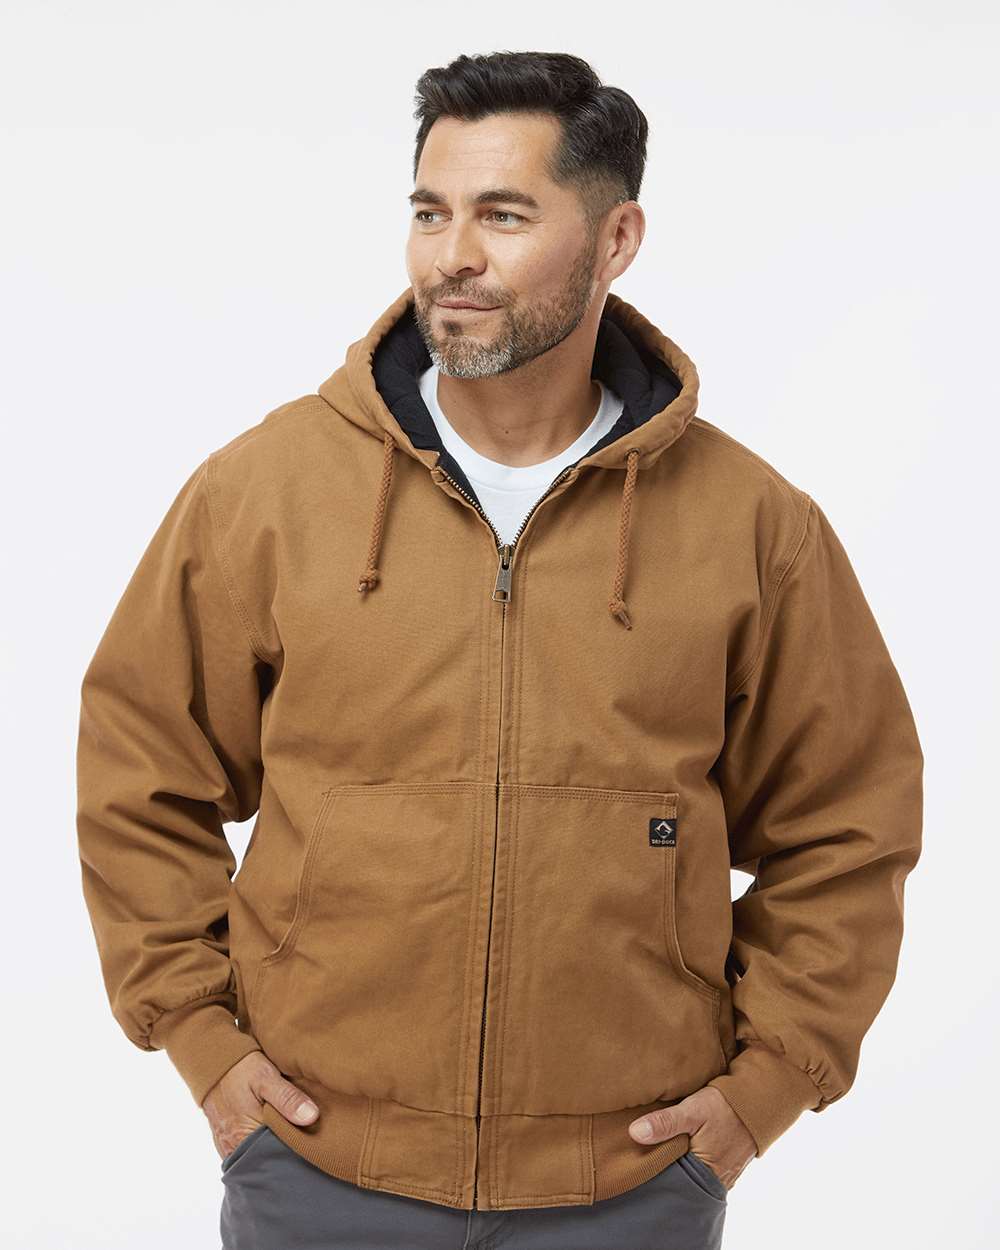 DRI DUCK Cheyenne Boulder Cloth™ Hooded Jacket with Tricot Quilt Lining